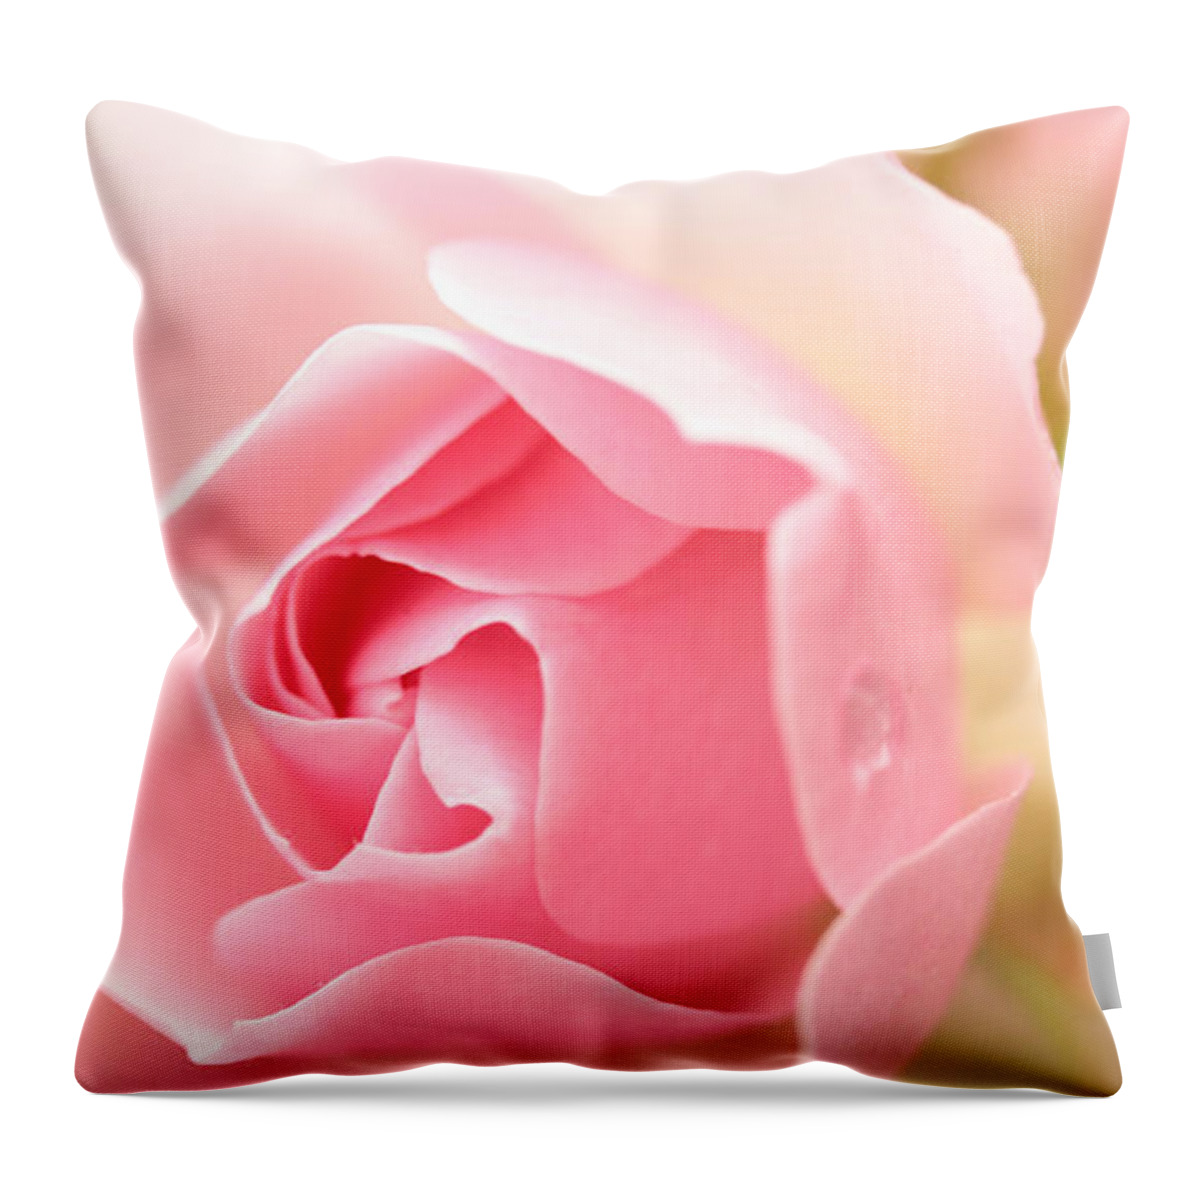 Connie Handscomb Throw Pillow featuring the photograph Silence Of The Heart by Connie Handscomb